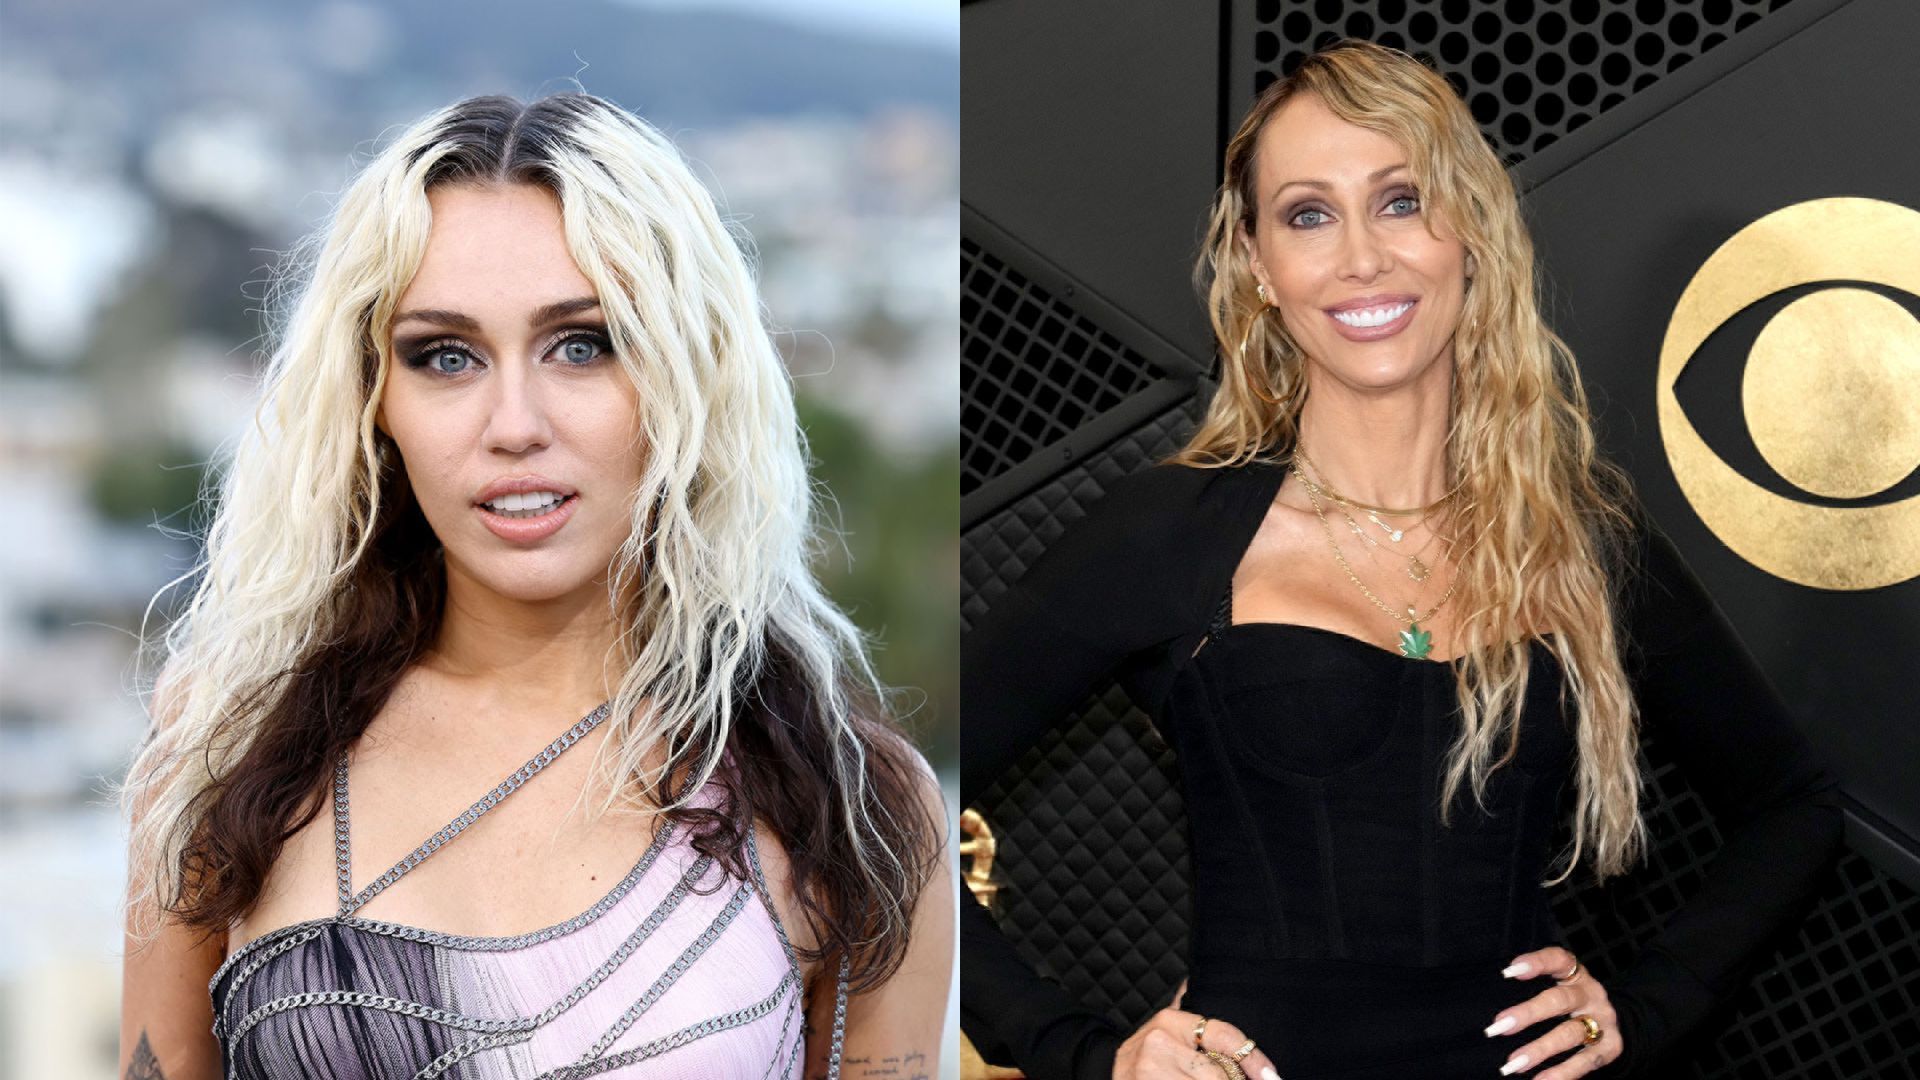 Miley Cyrus fans astonished by resemblance to mom Tish in new photo